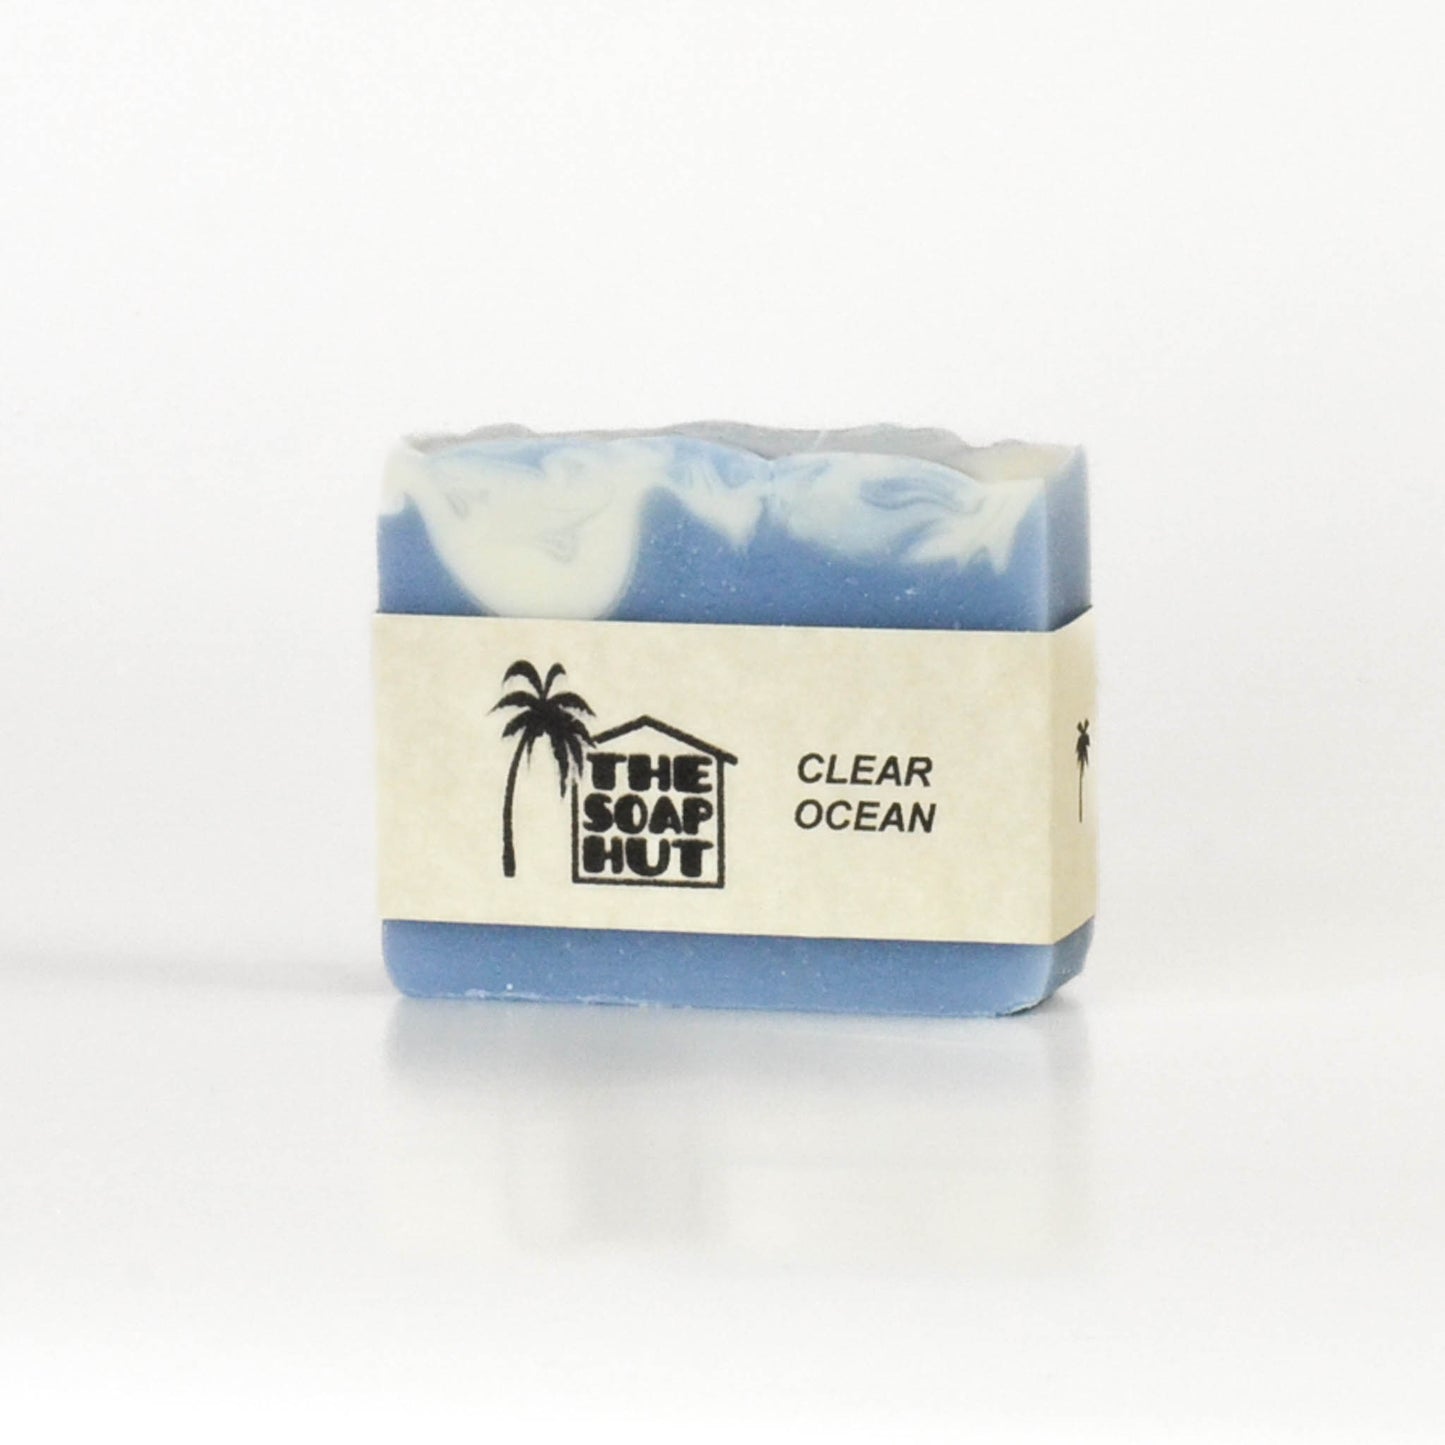 Eco Shark's signature scent of Clear Ocean - light, fresh and clean scent for the whole family